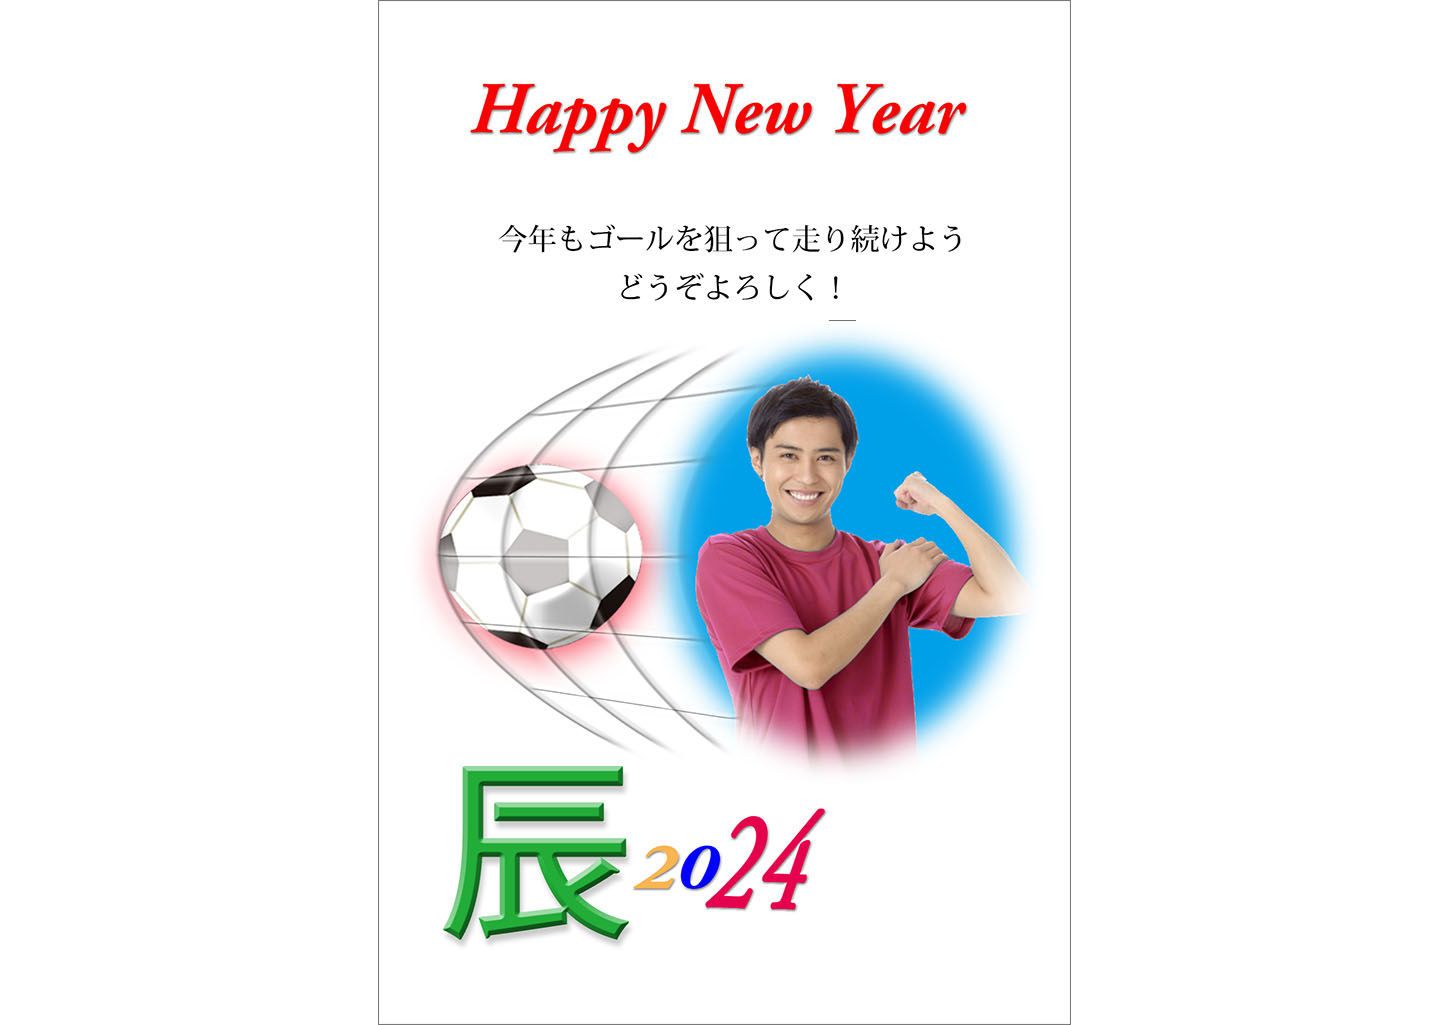 R7-PHO-PNG-27｜ダウンロード無料｜フォト年賀状デザイン素材